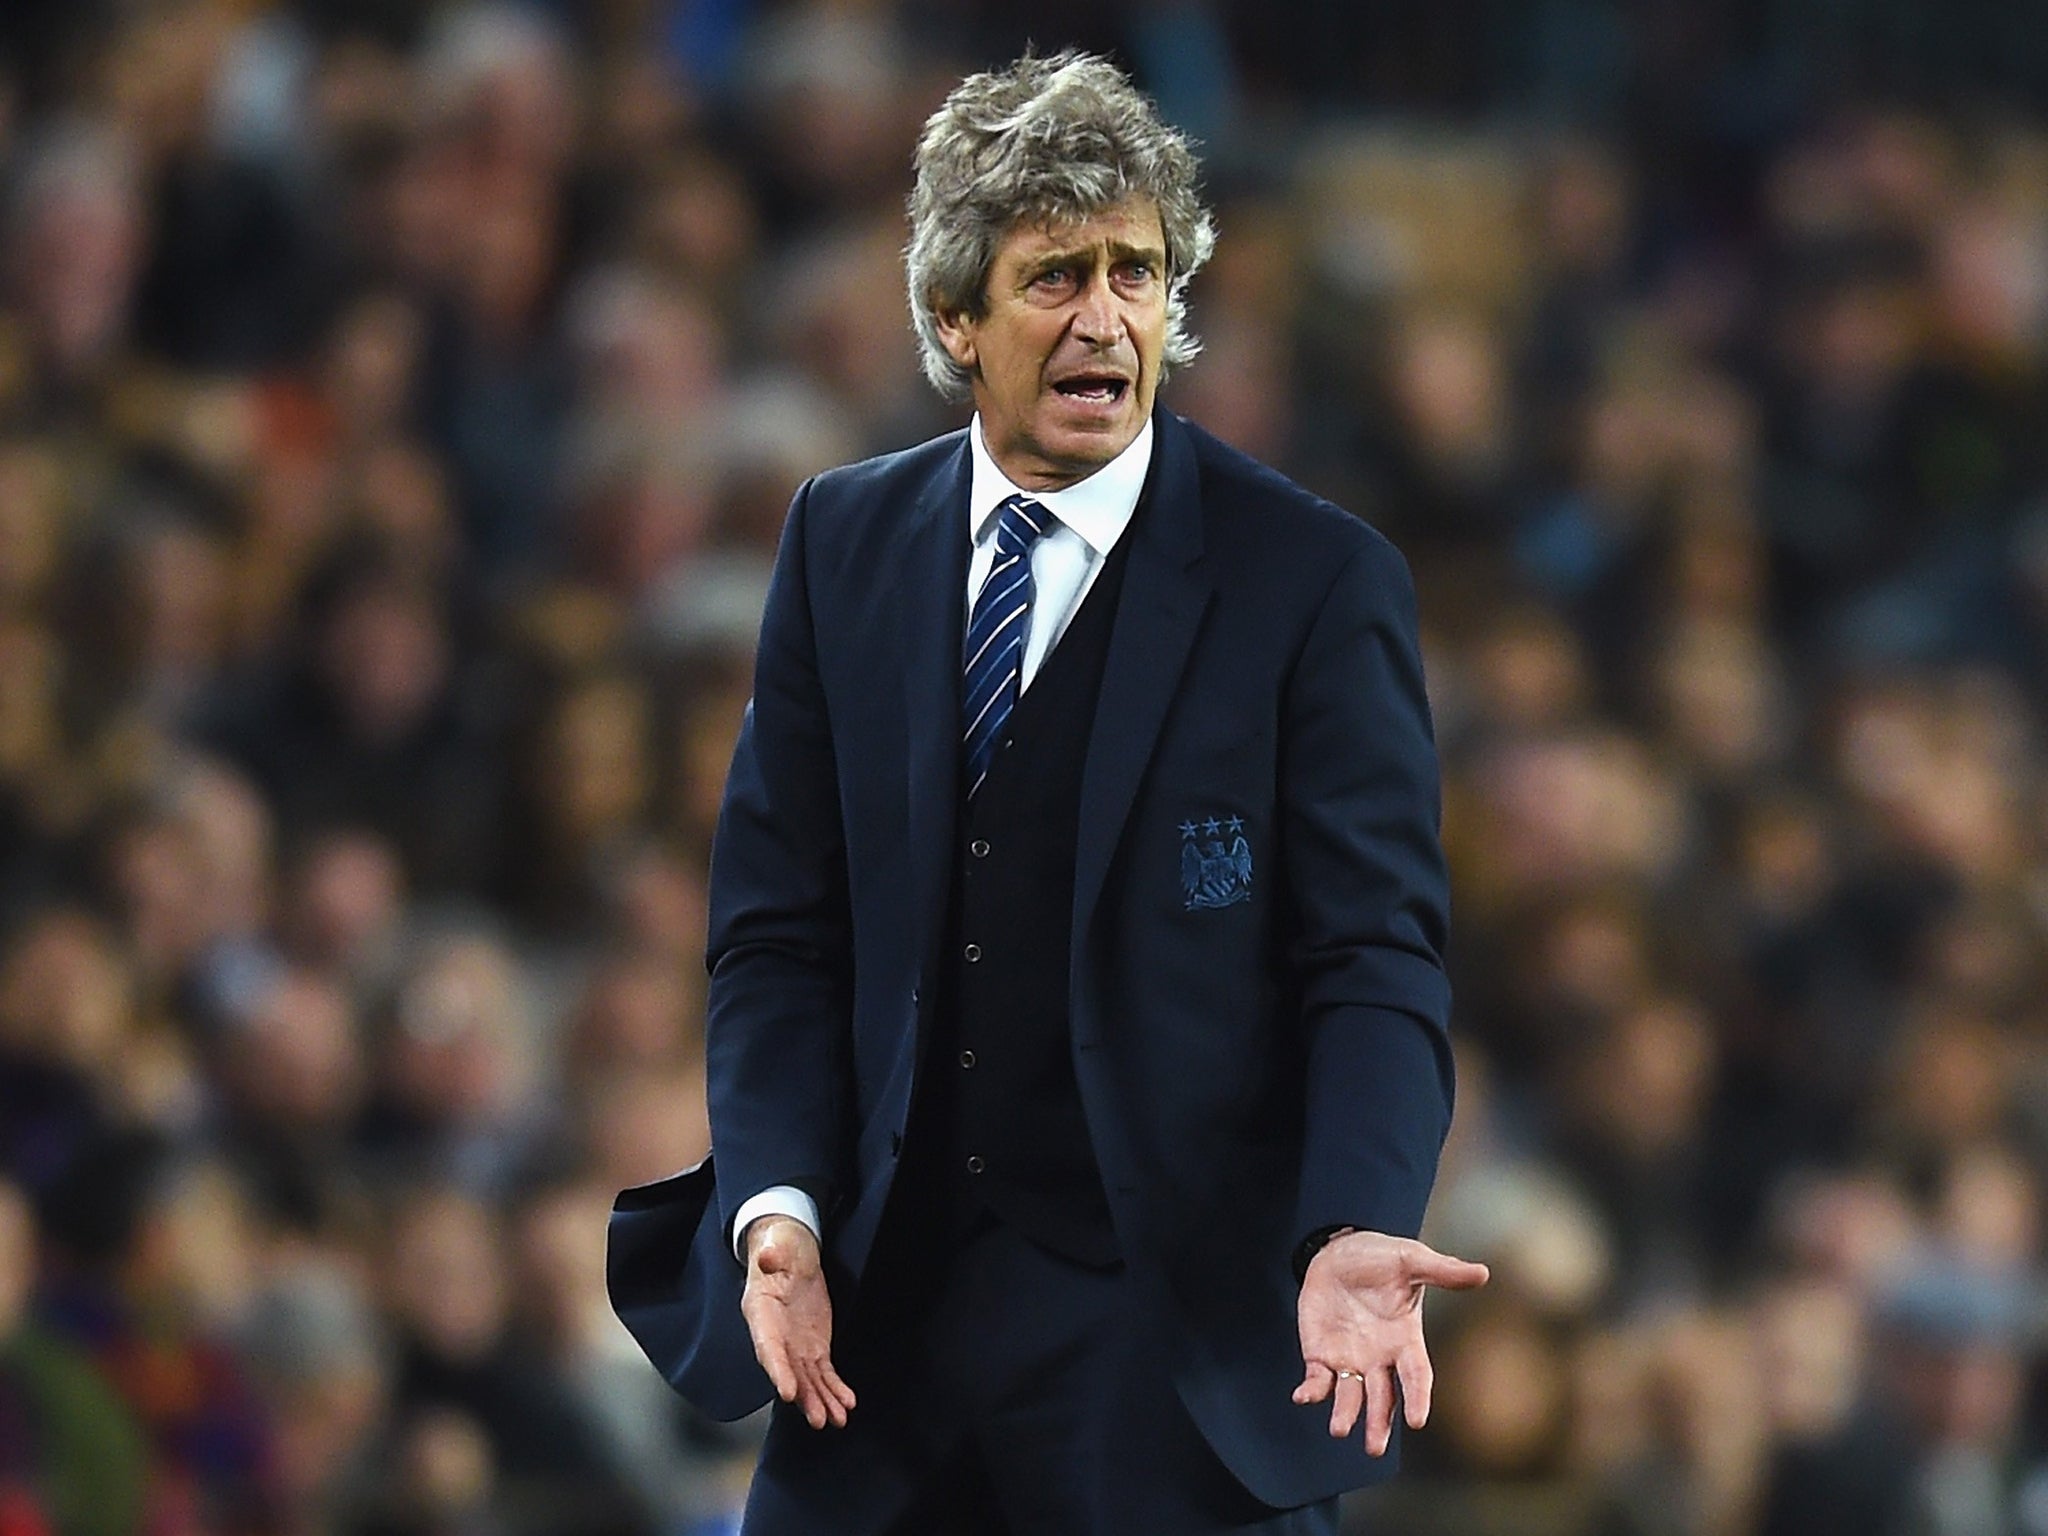 Manuel Pellegrini’s current contract ends next summer and he is highly unlikely to be offered a new deal